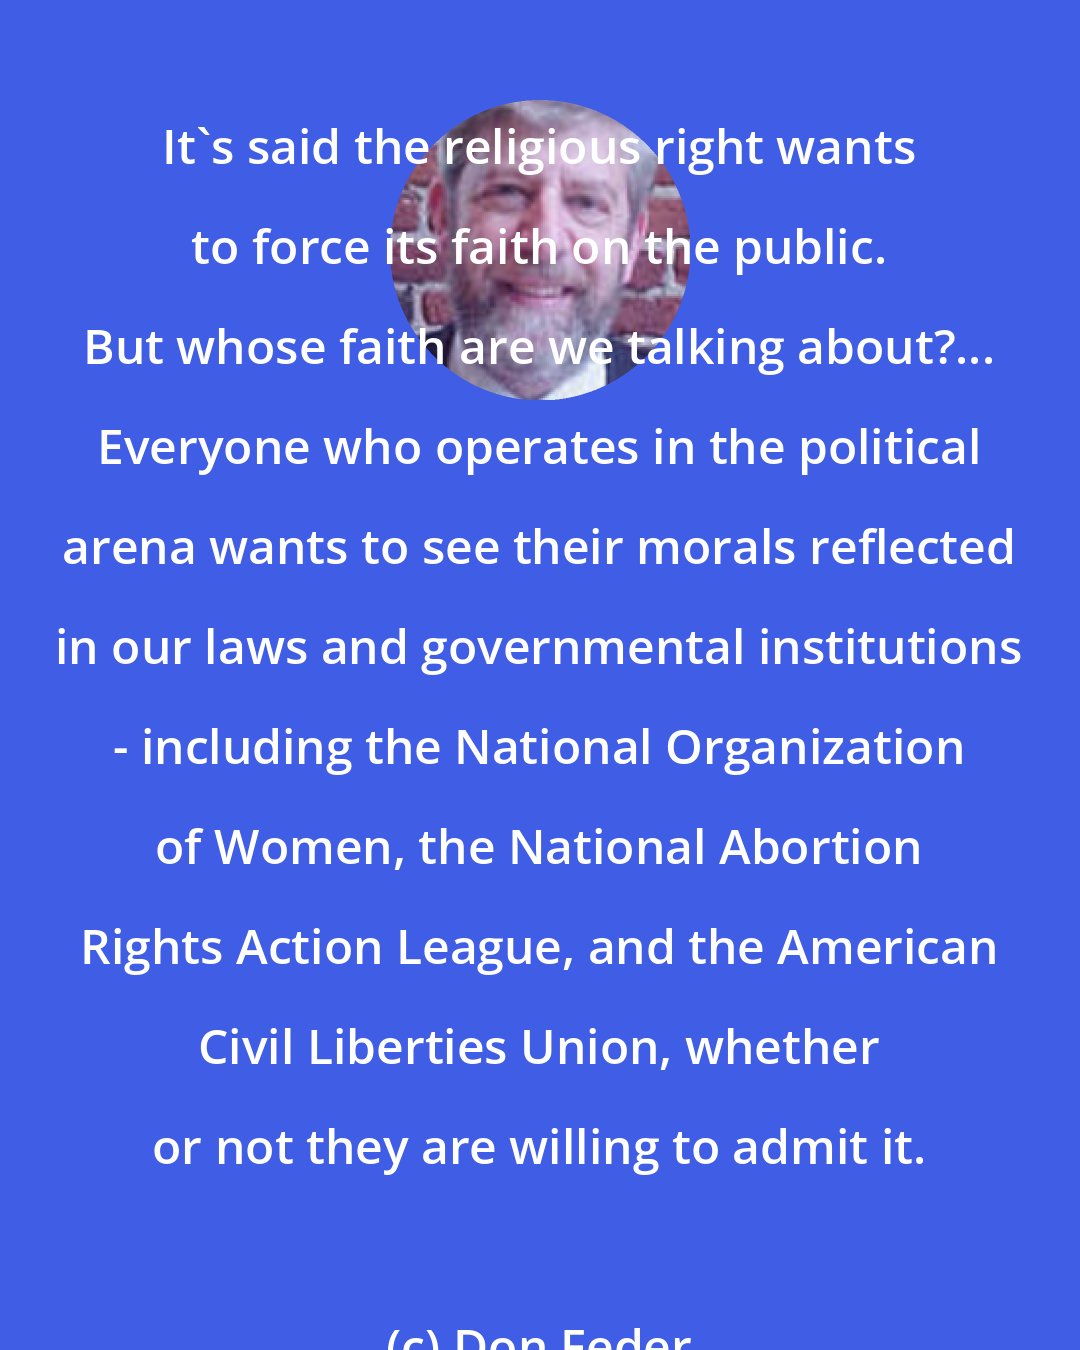 Don Feder: It's said the religious right wants to force its faith on the public. But whose faith are we talking about?... Everyone who operates in the political arena wants to see their morals reflected in our laws and governmental institutions - including the National Organization of Women, the National Abortion Rights Action League, and the American Civil Liberties Union, whether or not they are willing to admit it.